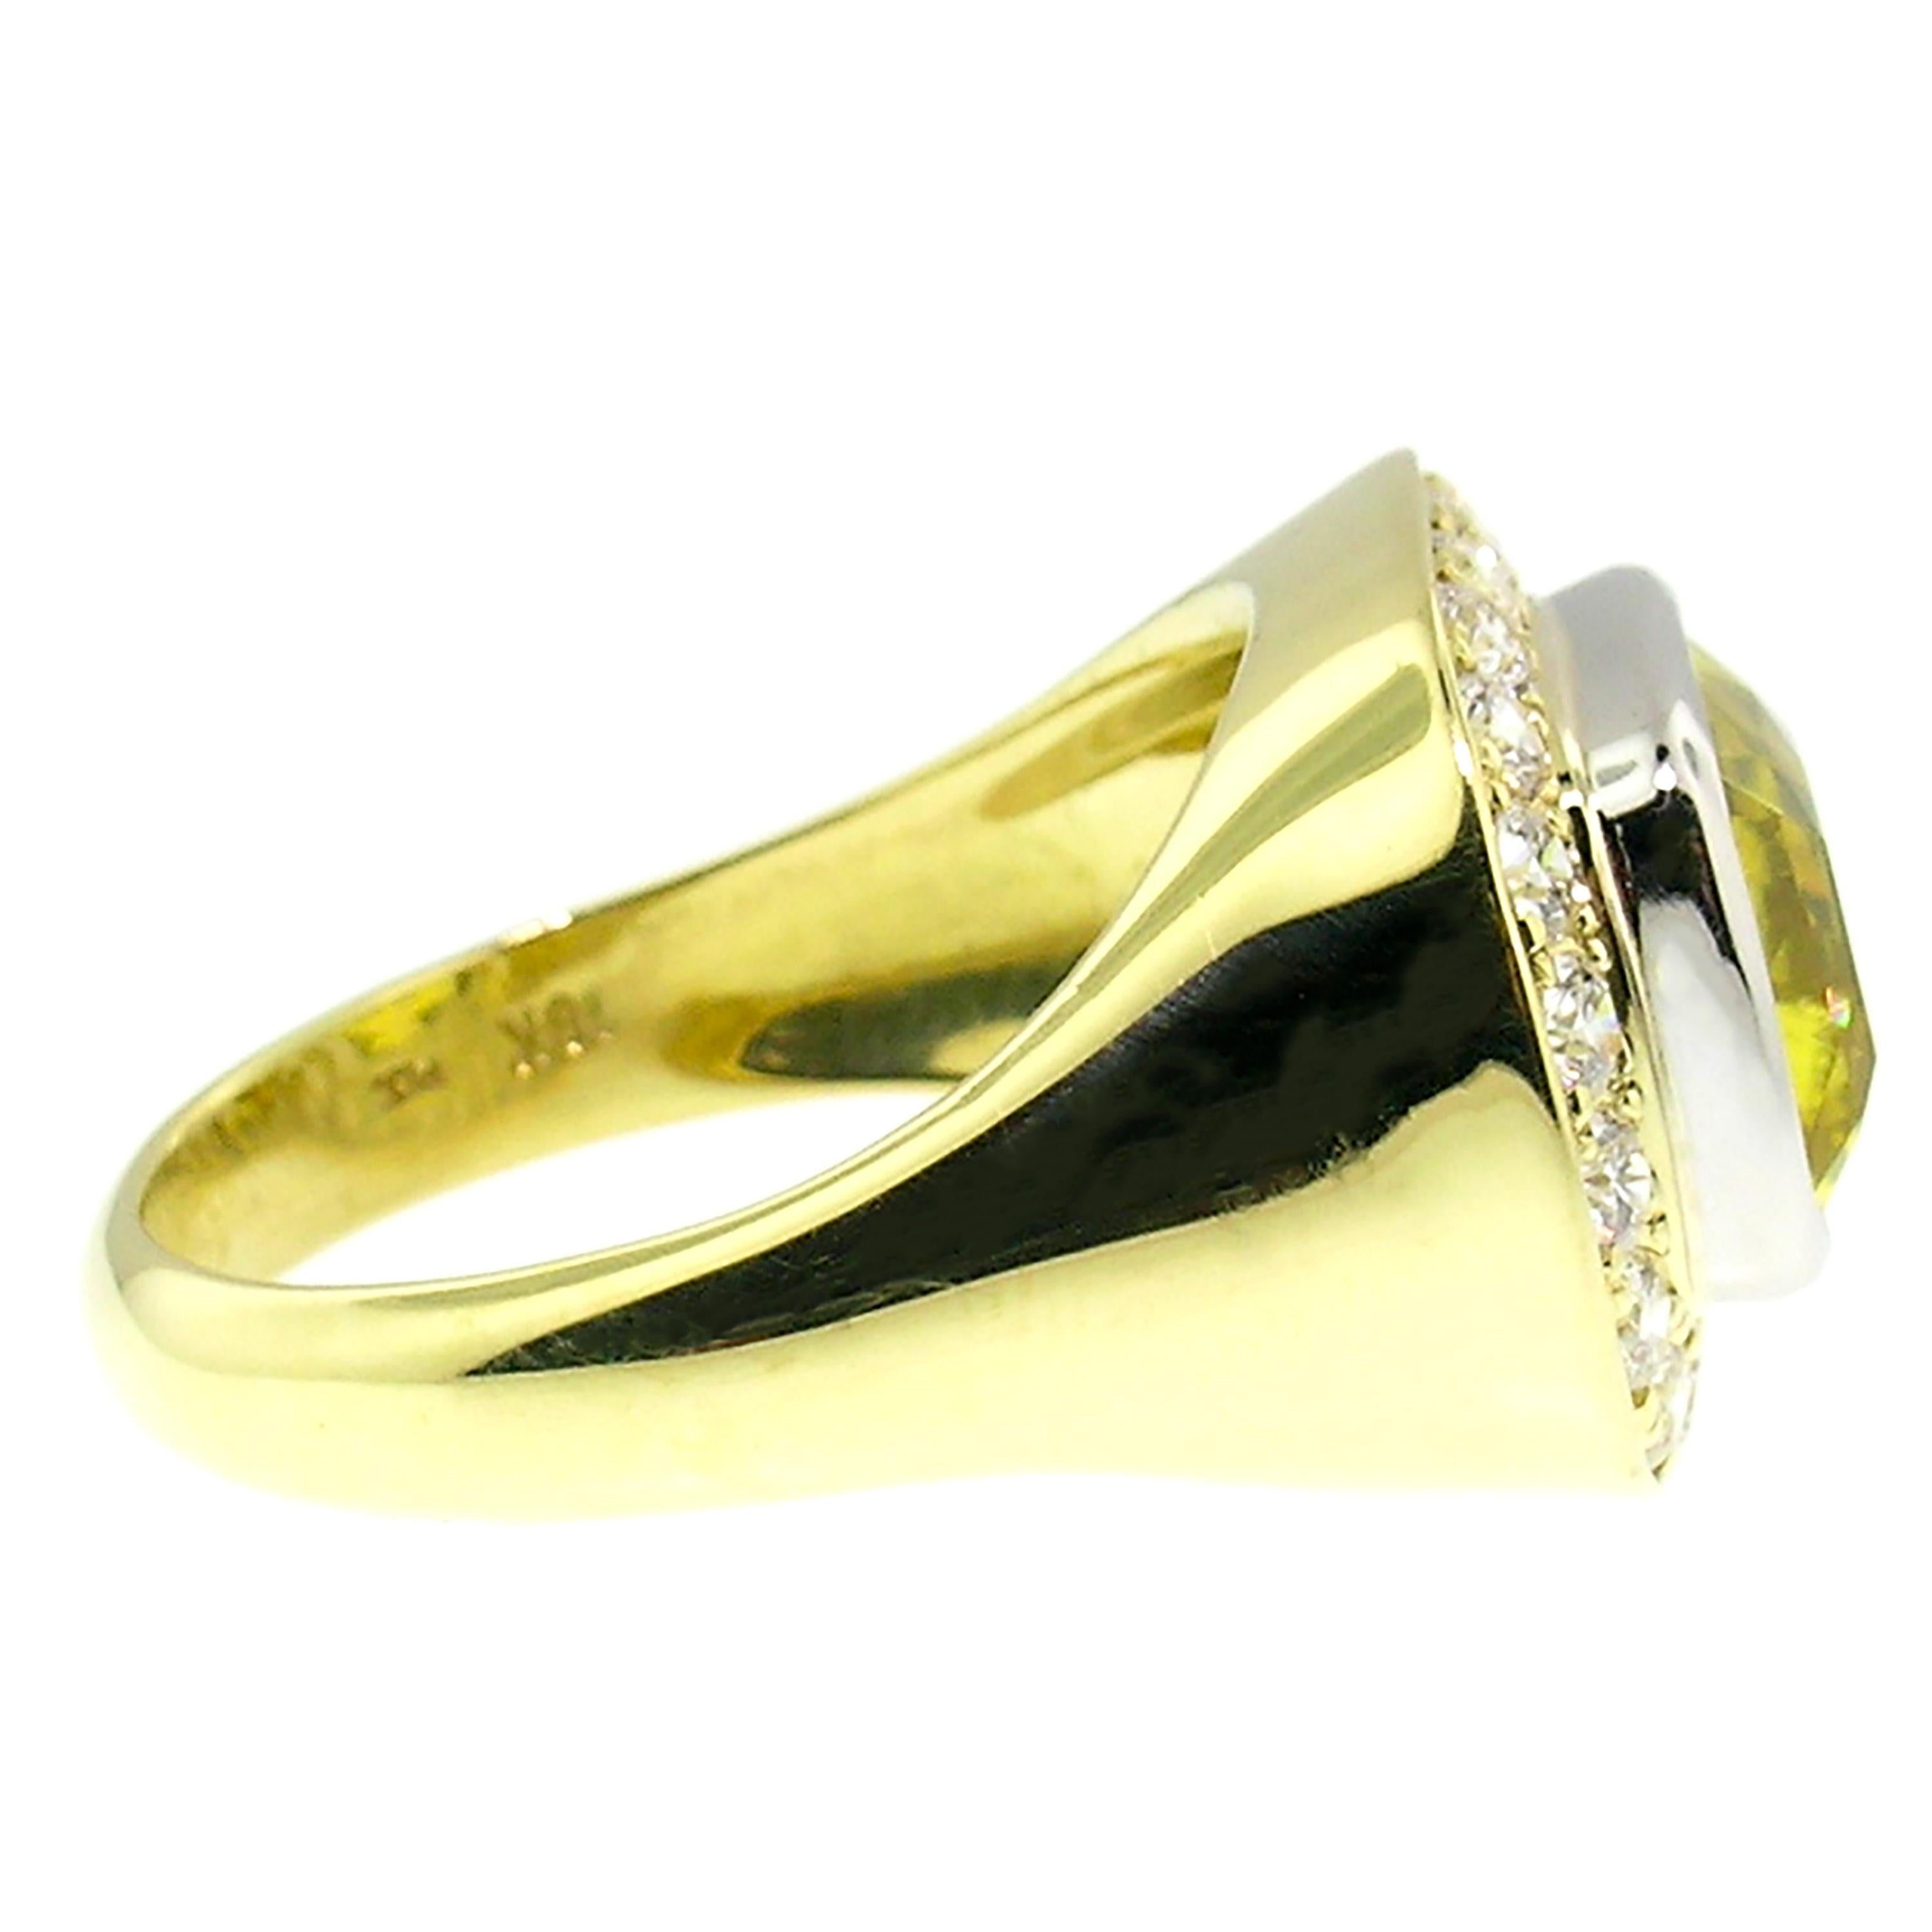 Cushion Cut 4.57 carat Canary Yellow Tourmaline & Diamond 18kt Aphrodite Ring, GIA Report For Sale